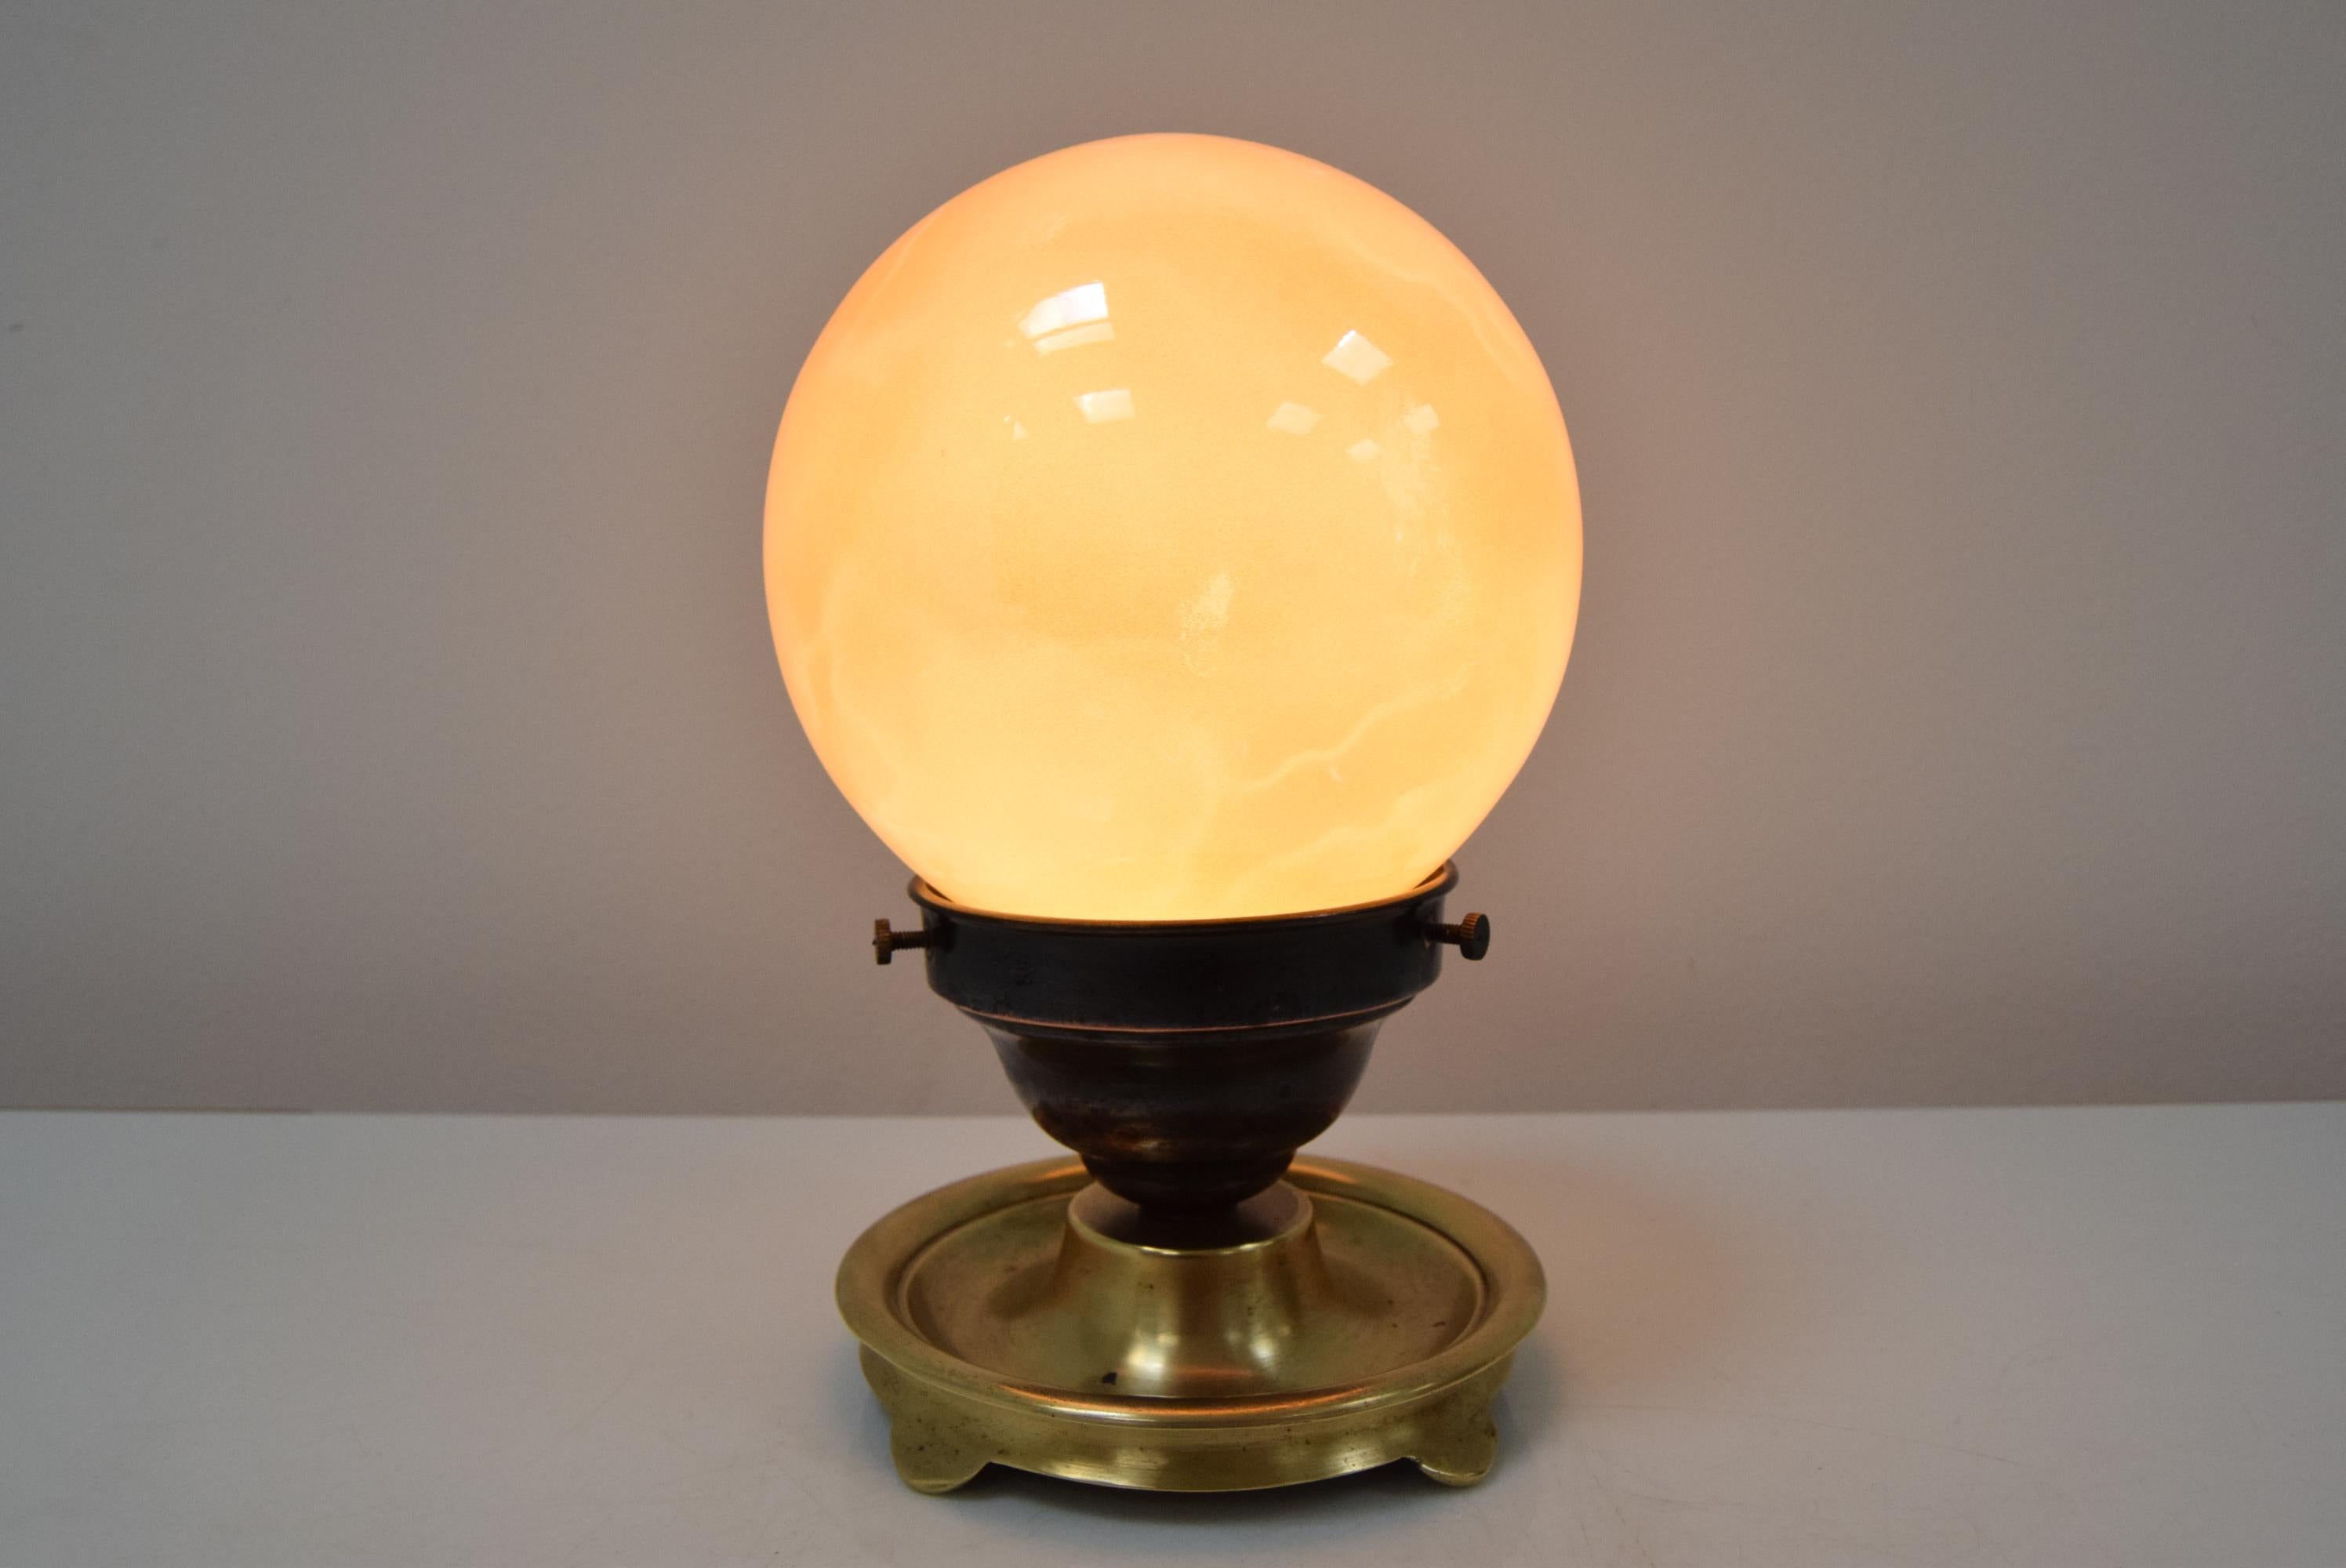 Made in Czechoslovakia
Made of glass, metal, brass
New Cabling
1x E27 or E26 bulb
With aged patina
Re-polished
Good original condition
US adapter included.